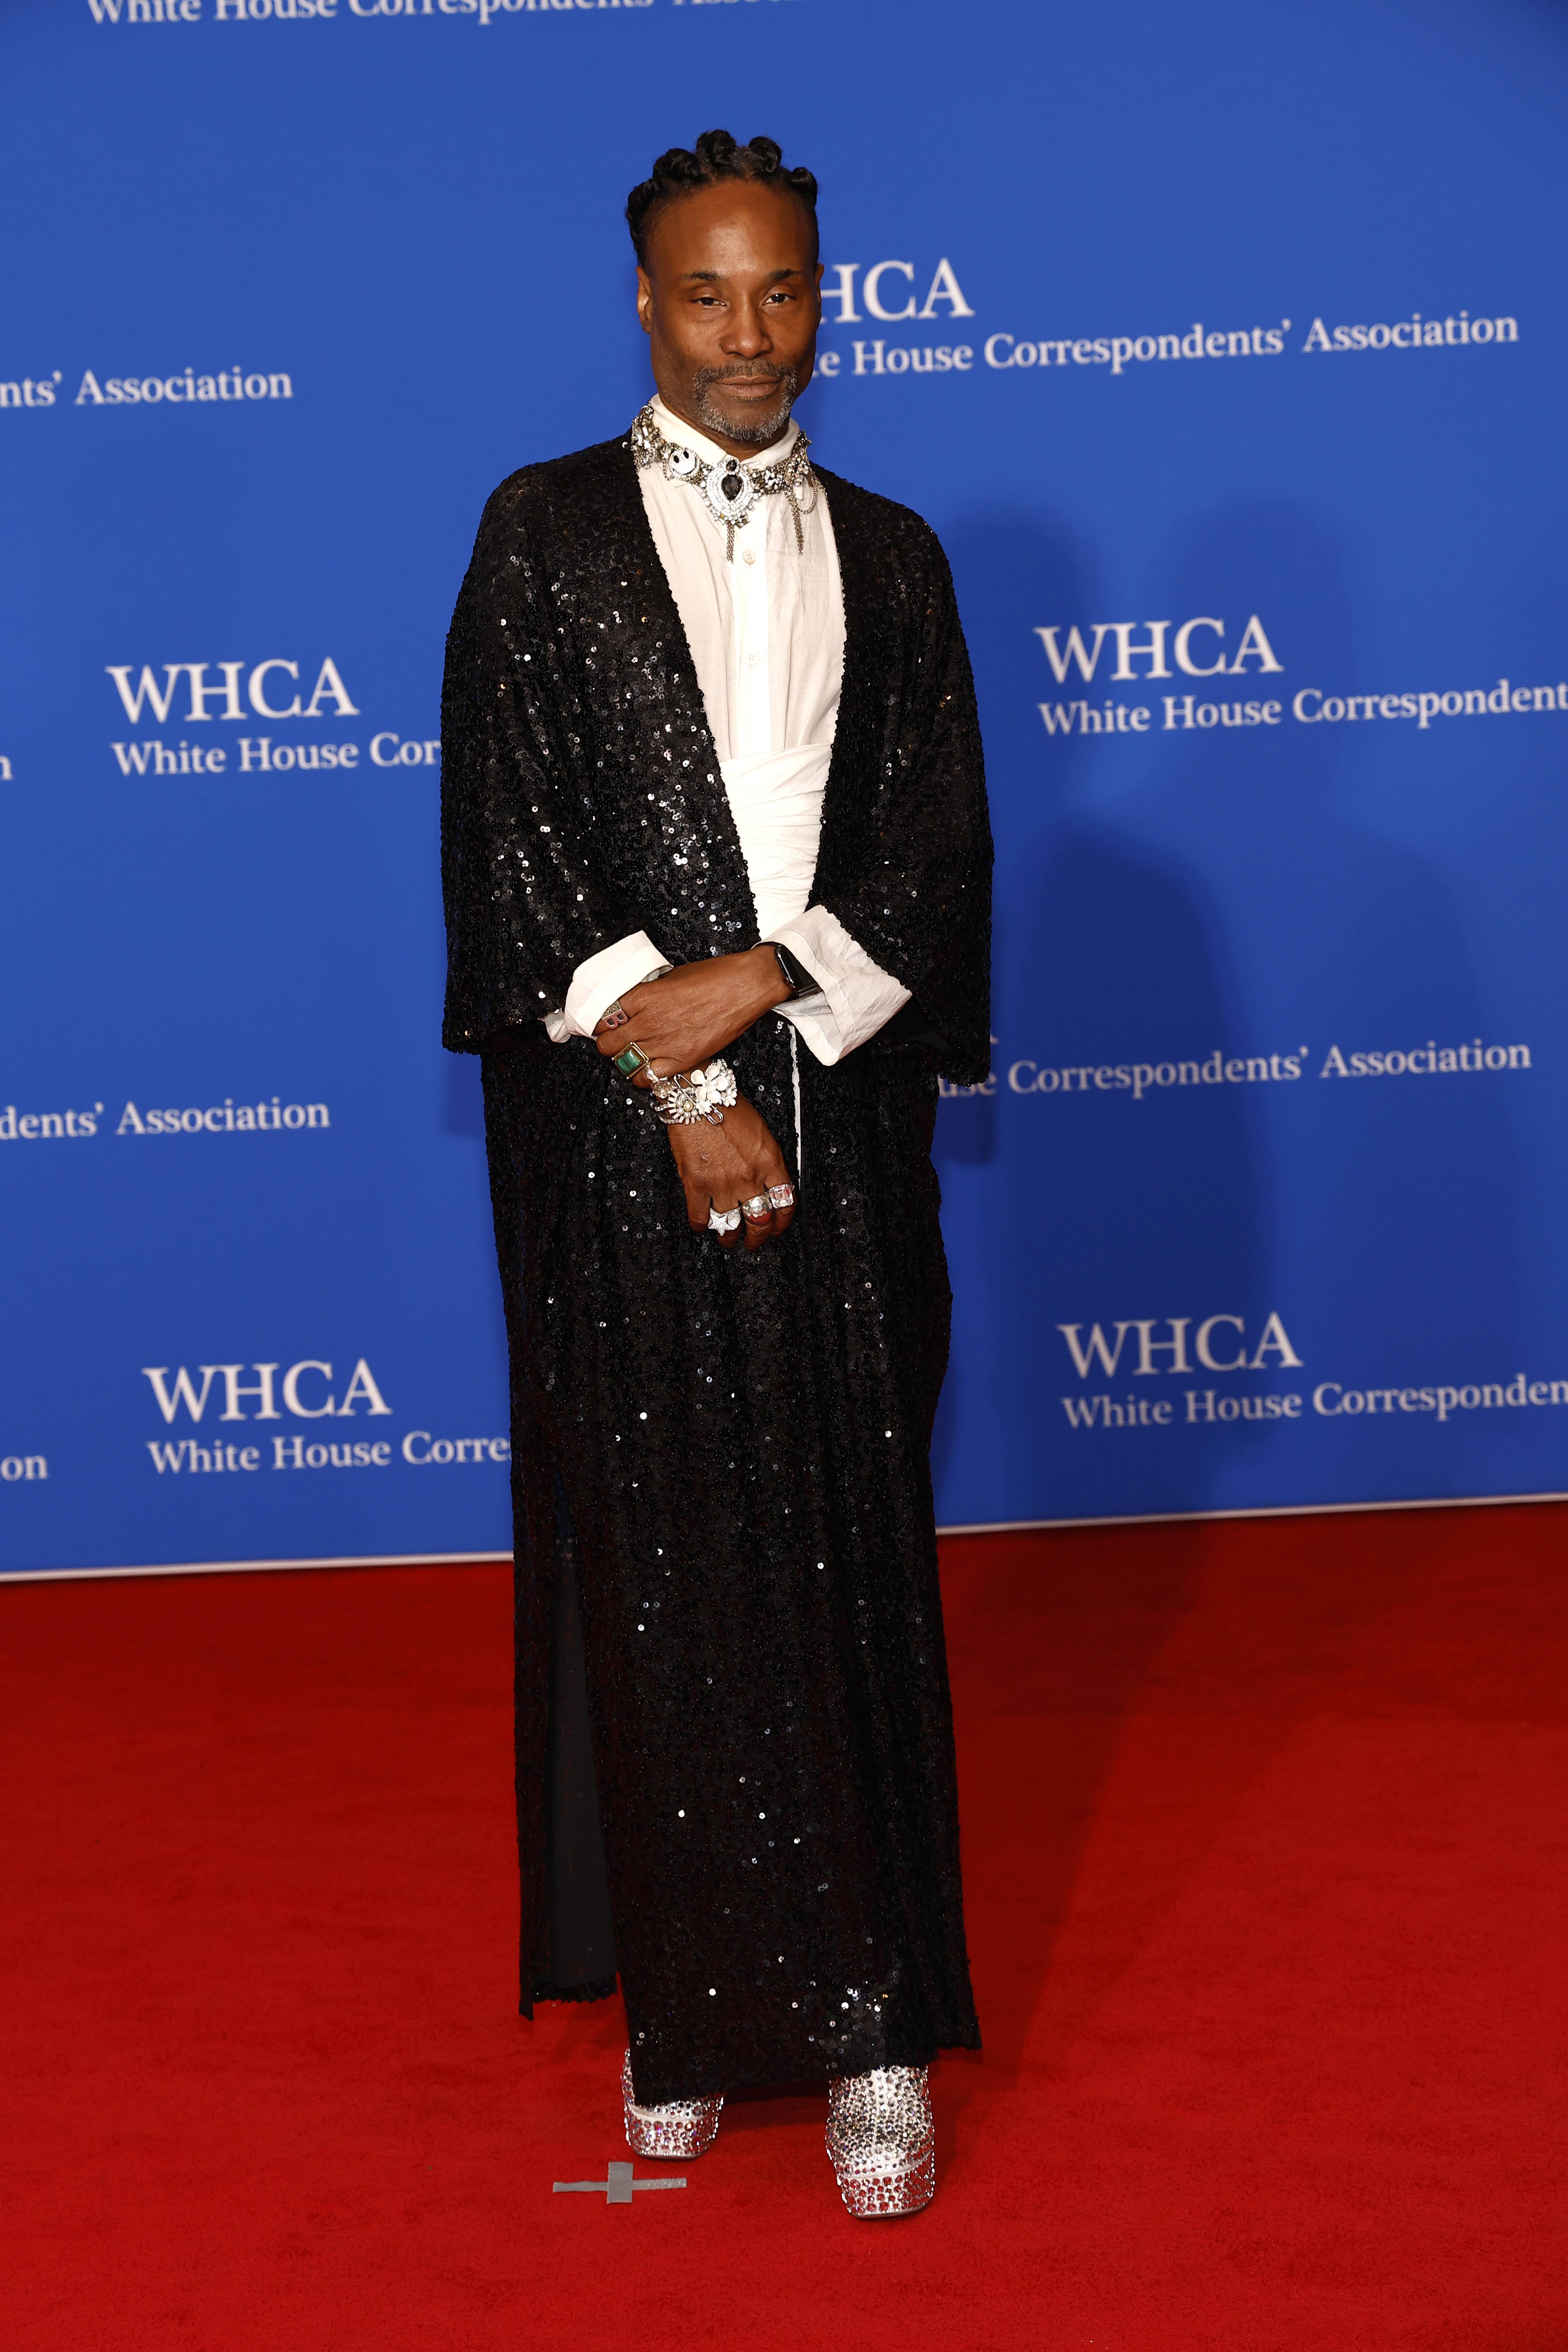 Billy Porter in a sparkling black outfit with a white scarf and glittering shoes at the WHCA event